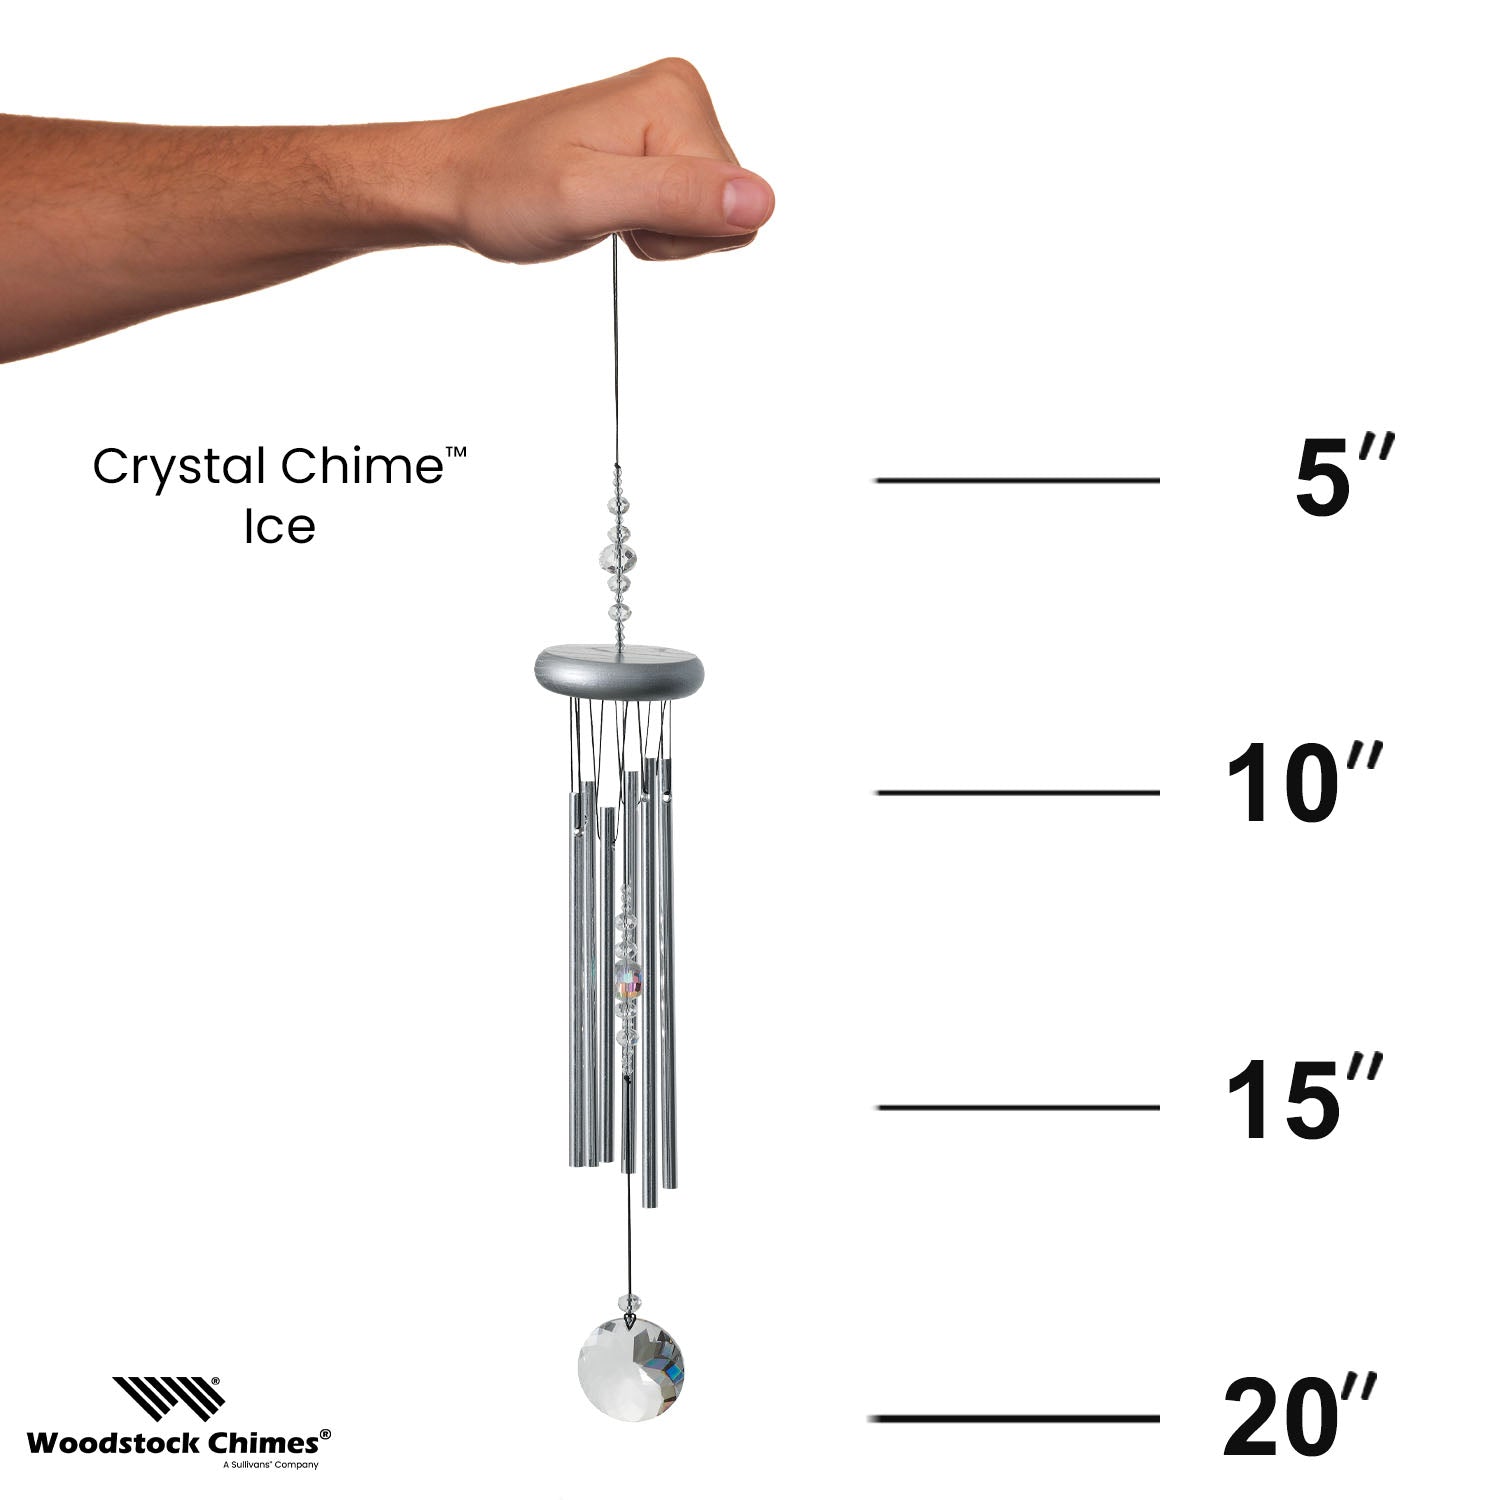 Crystal Chime - Ice proportion image